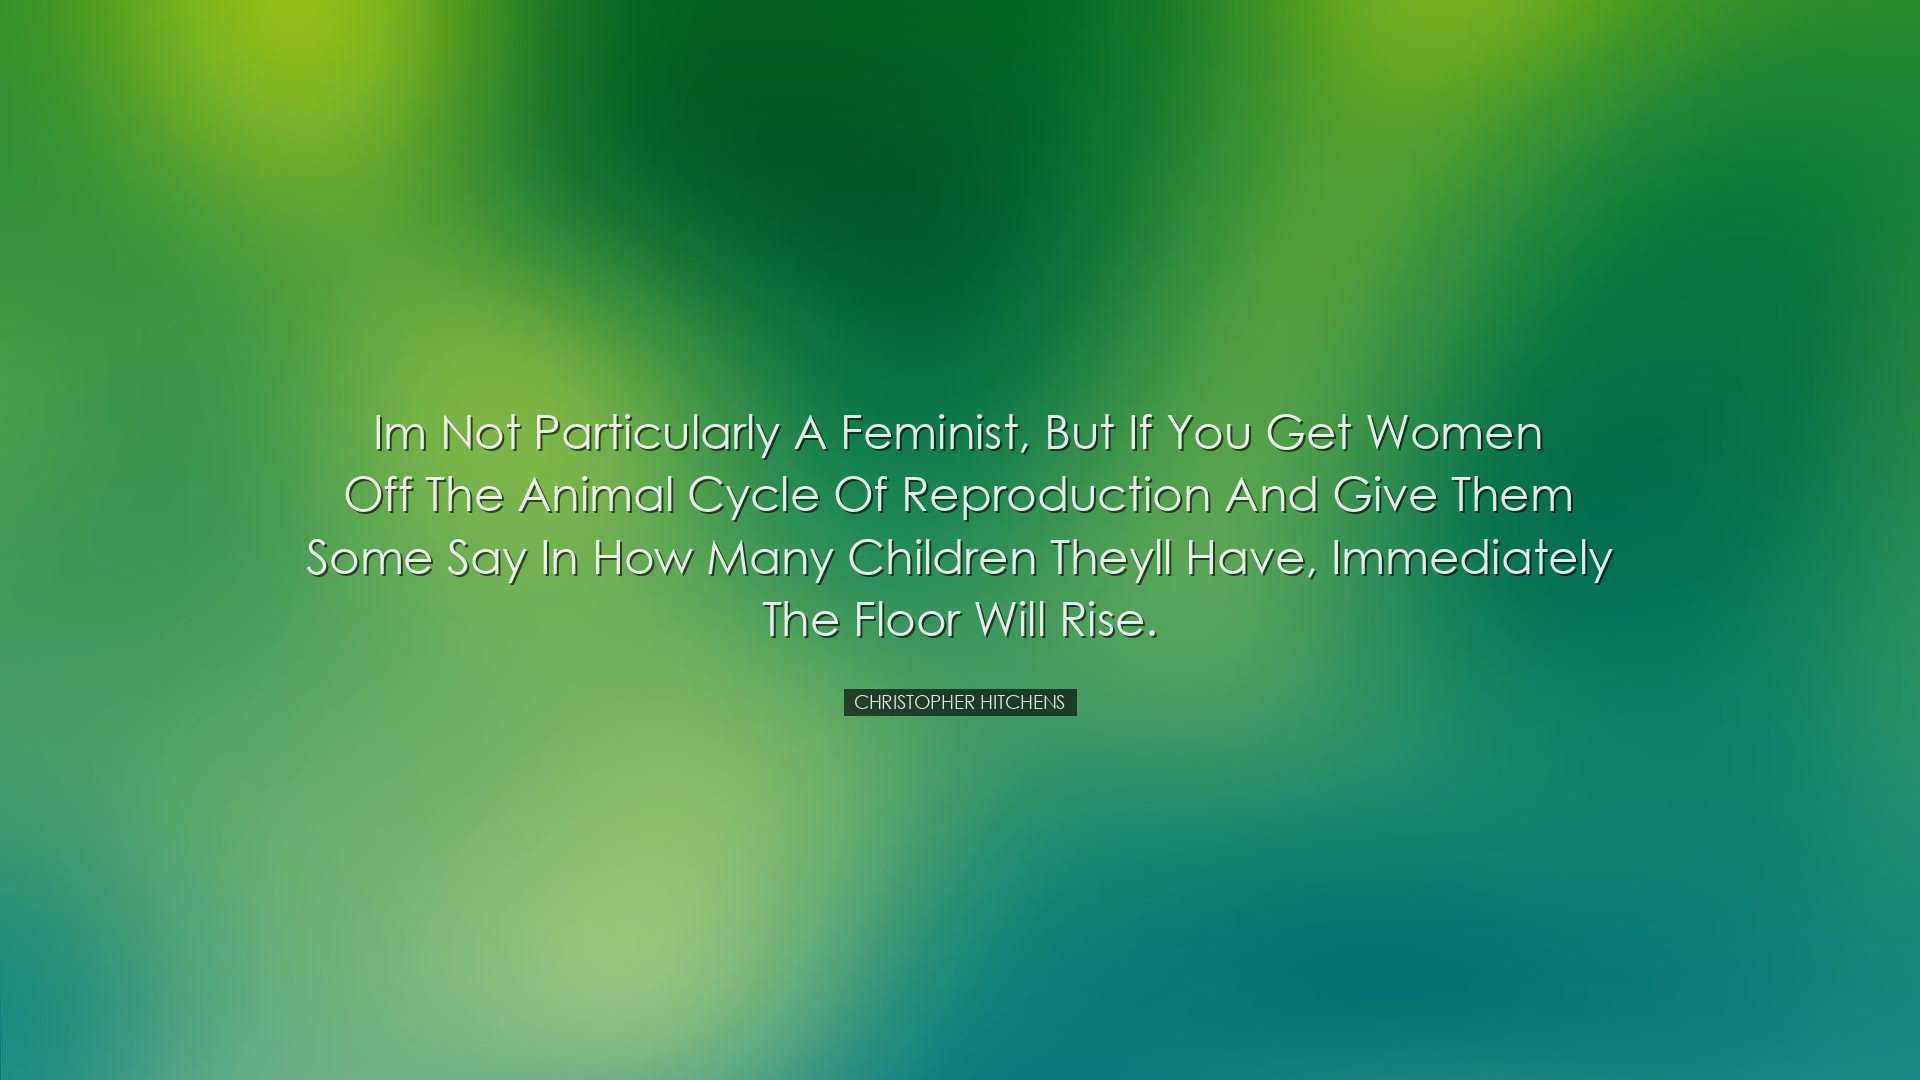 Im not particularly a feminist, but if you get women off the anima